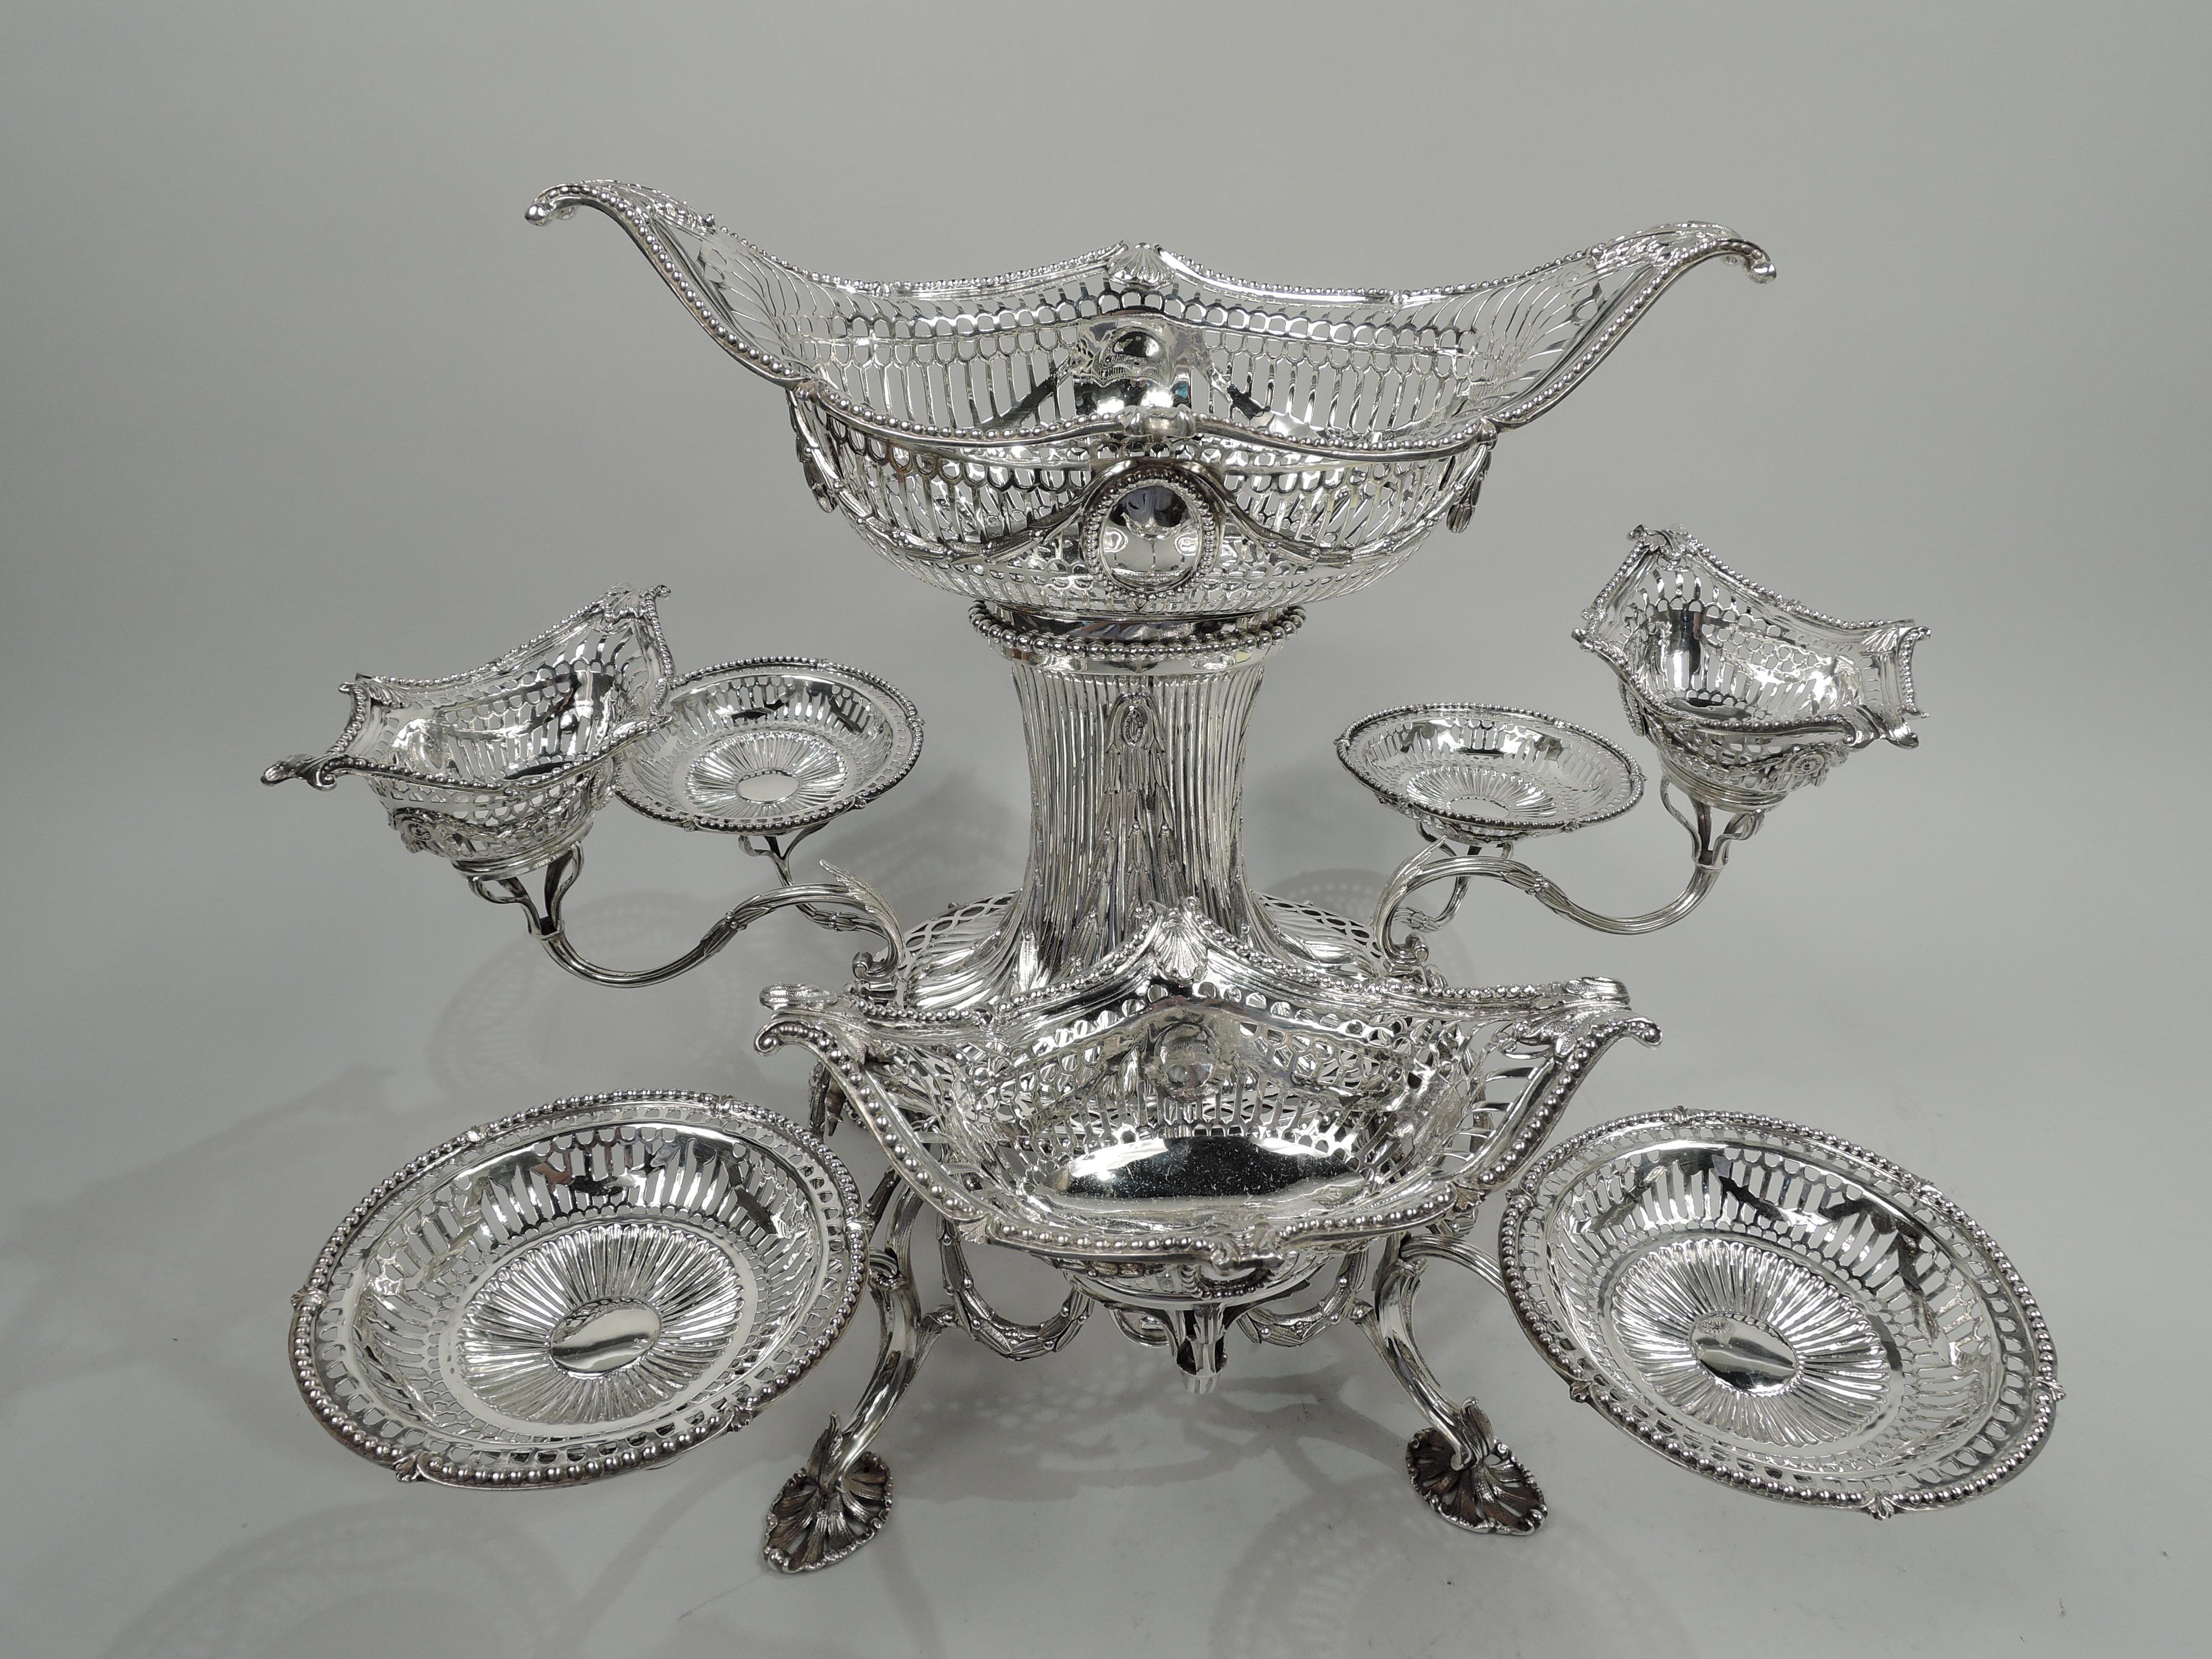 Victorian neoclassical sterling silver epergne. Made by Charles Stuart Harris in London in 1895. Central oval frame with pendant leaf garland threaded through fixed rings and supporting oval medallions with amphorae applied to stippled ground. Frame